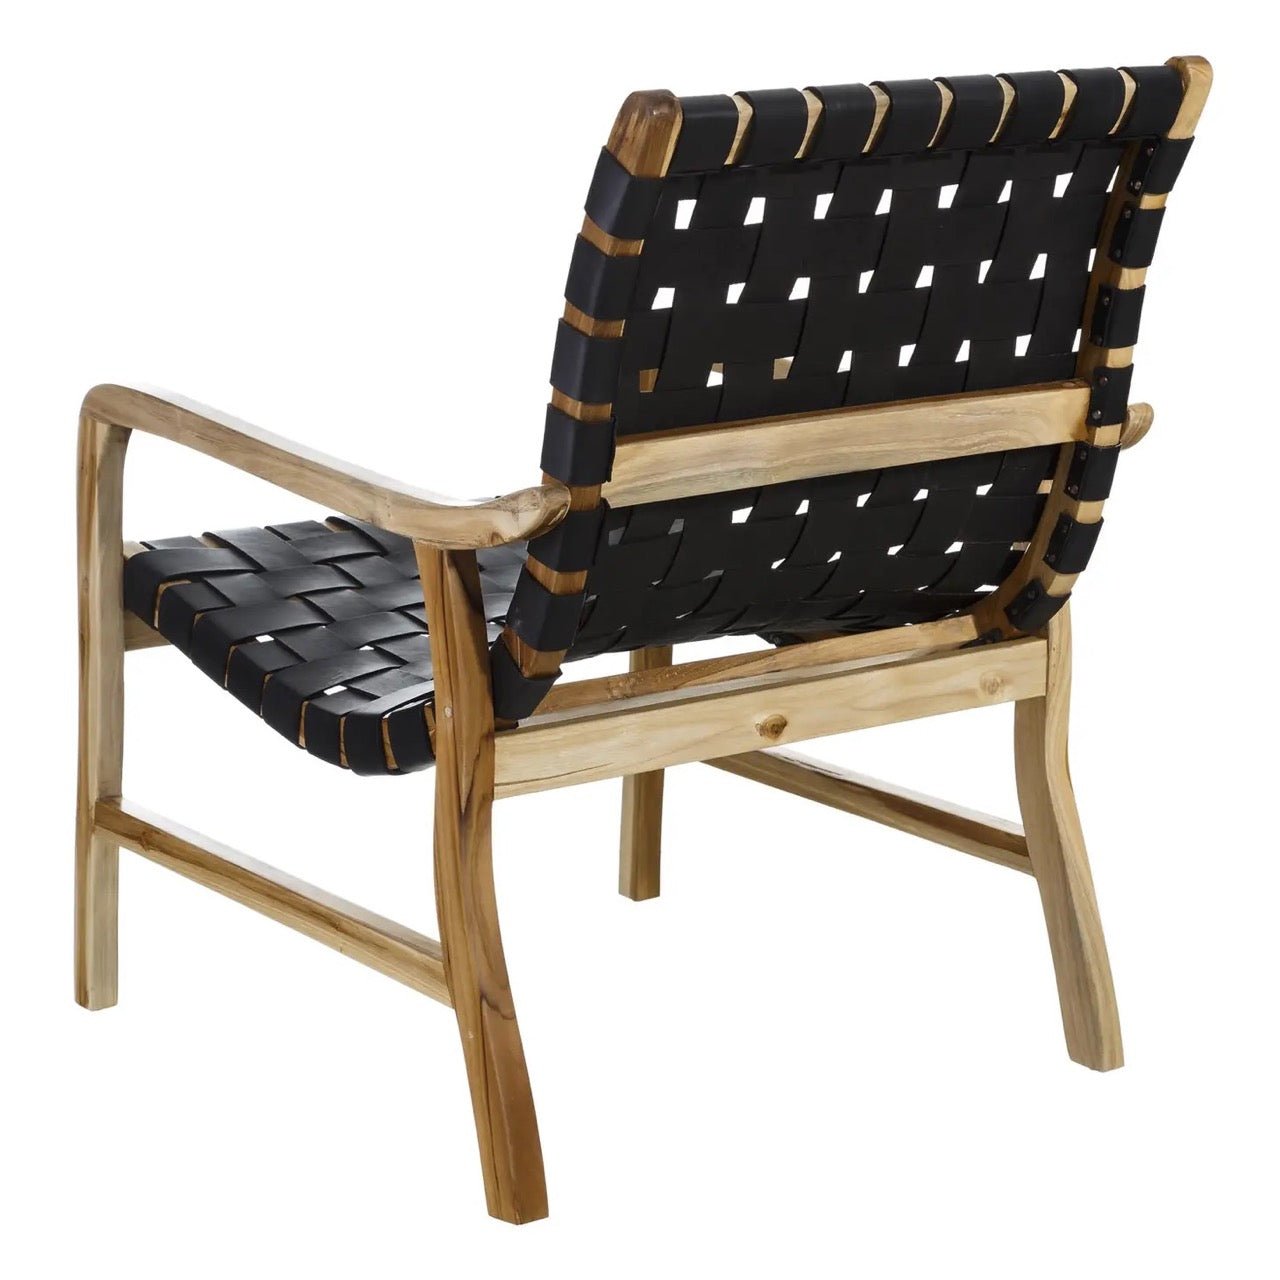 Woven Leather & Teak Wood Accent armchair - Black 70s Nordic Mid-Century  sling curved